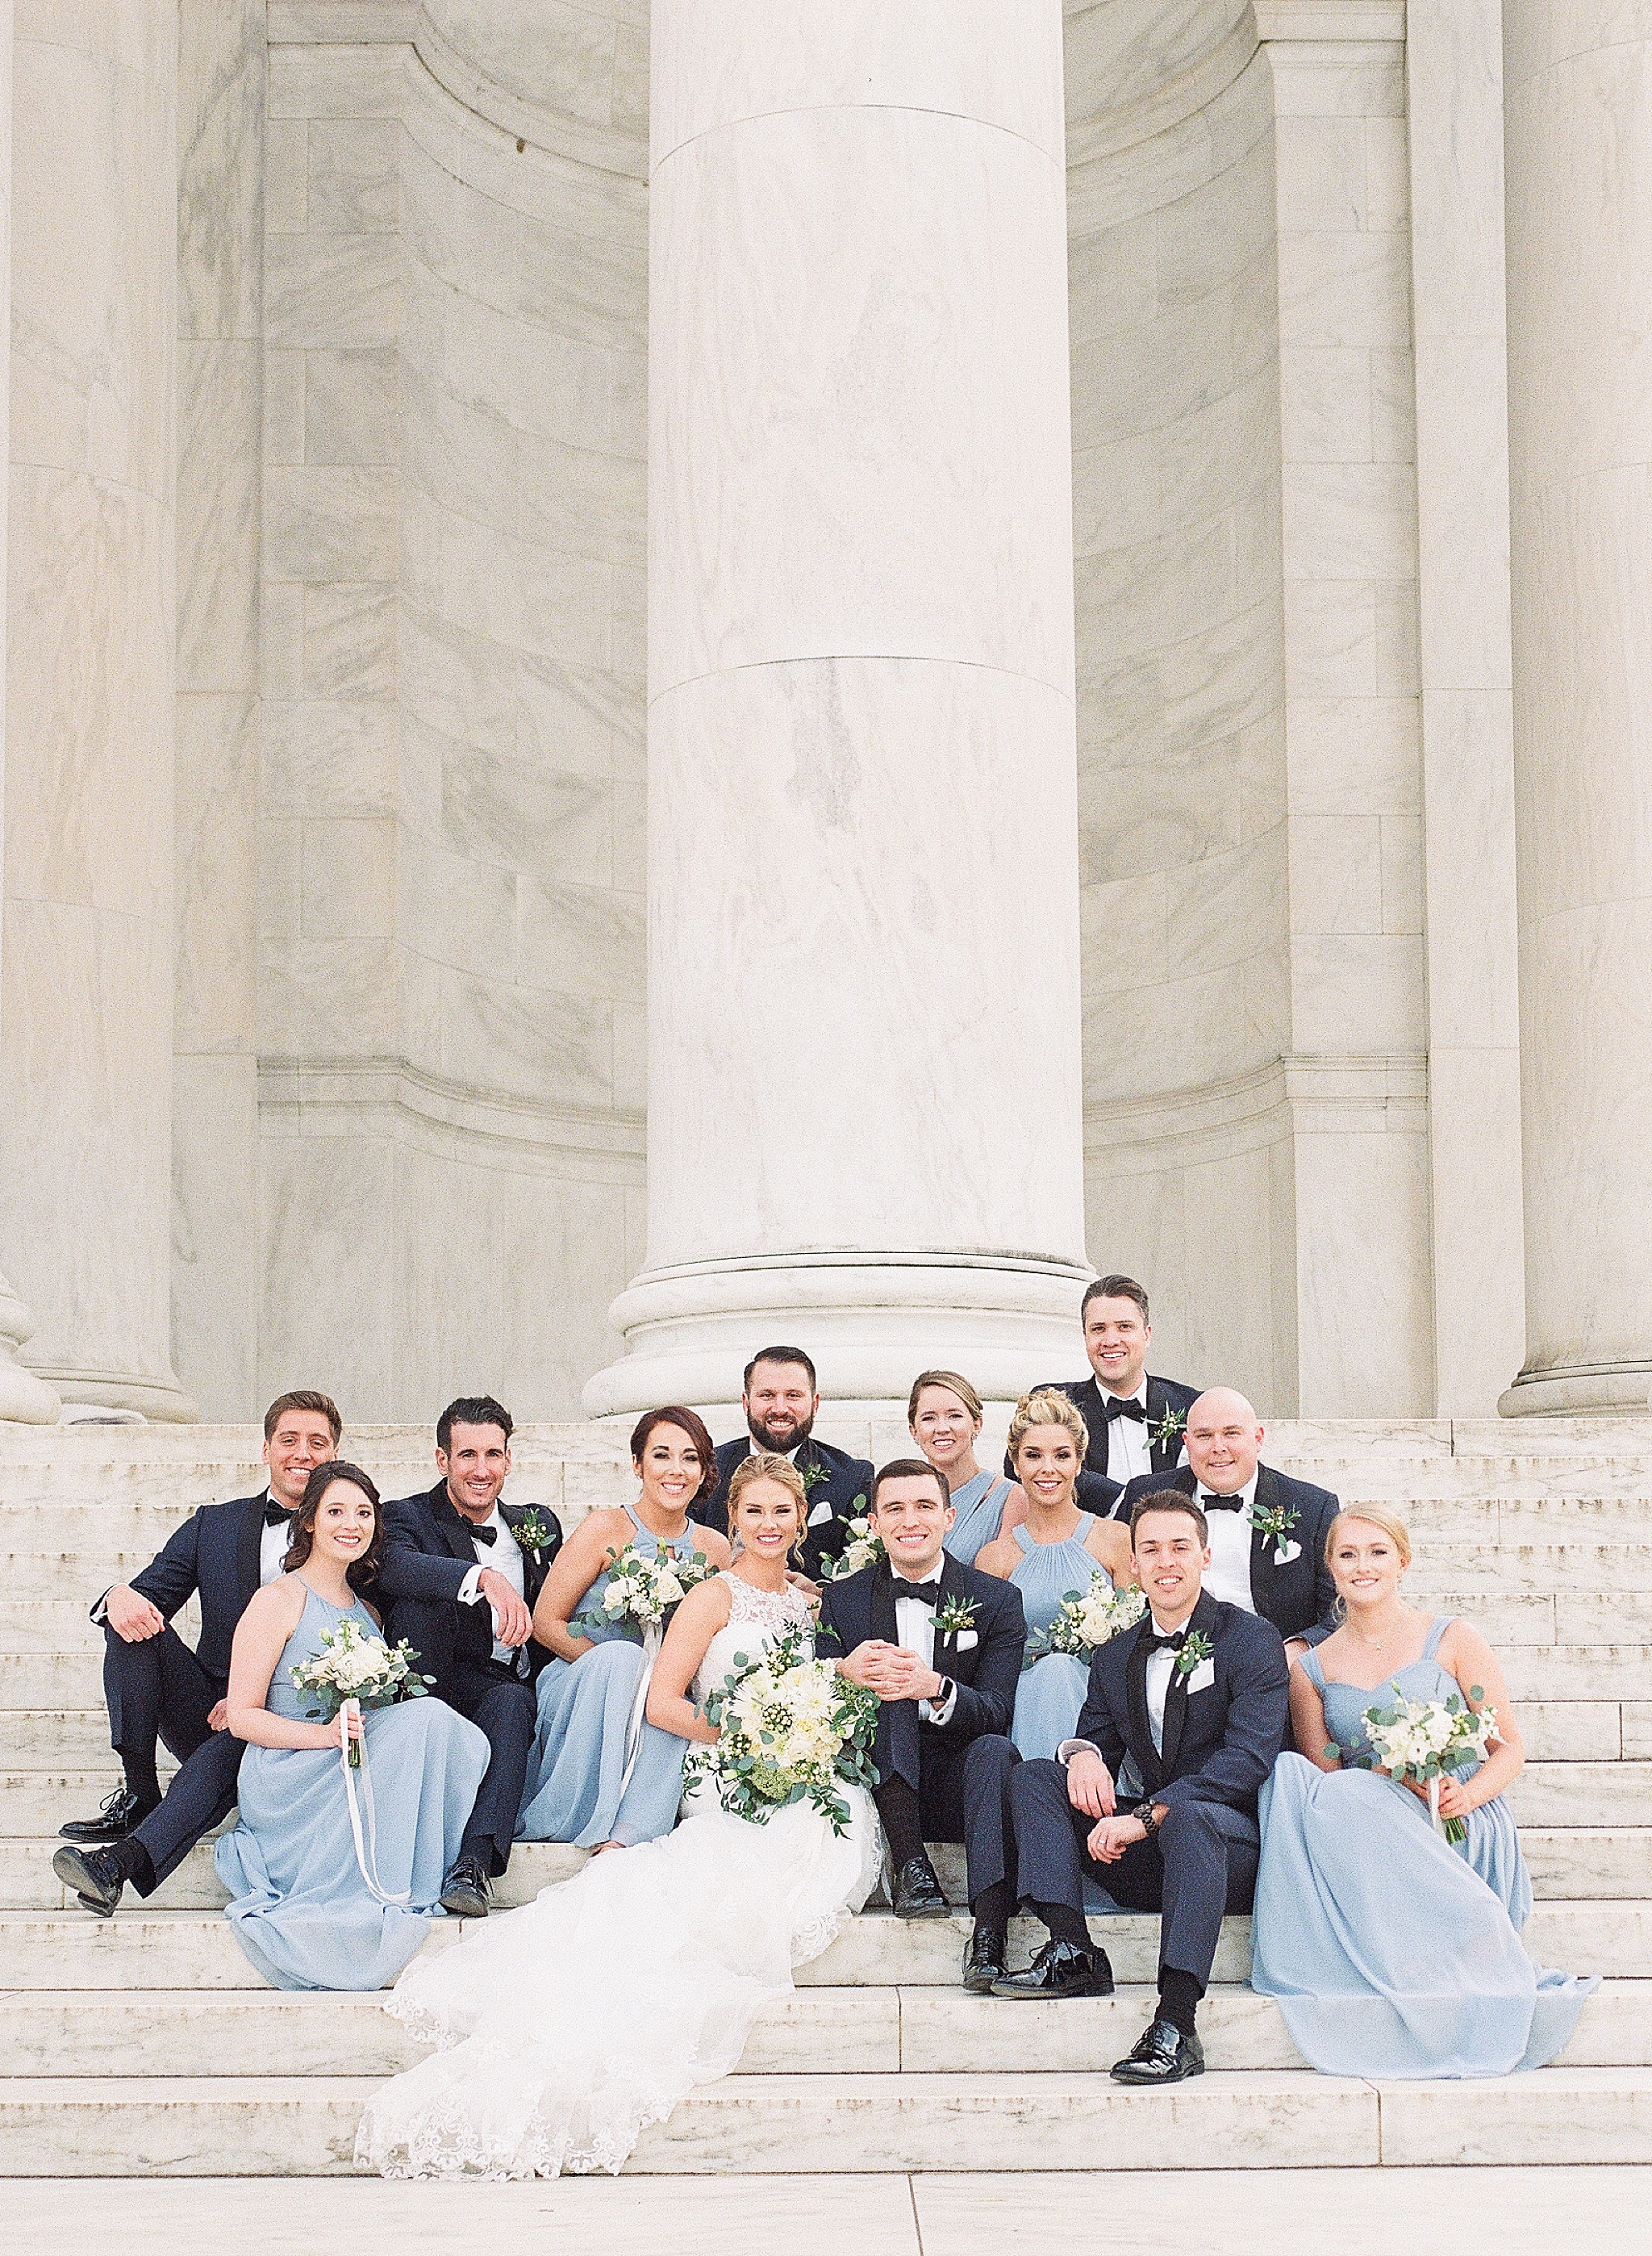 A classic Washington, DC wedding at the historic St. Matthews Cathedral with a reception at the Mayflower Hotel's Grand Ballroom.